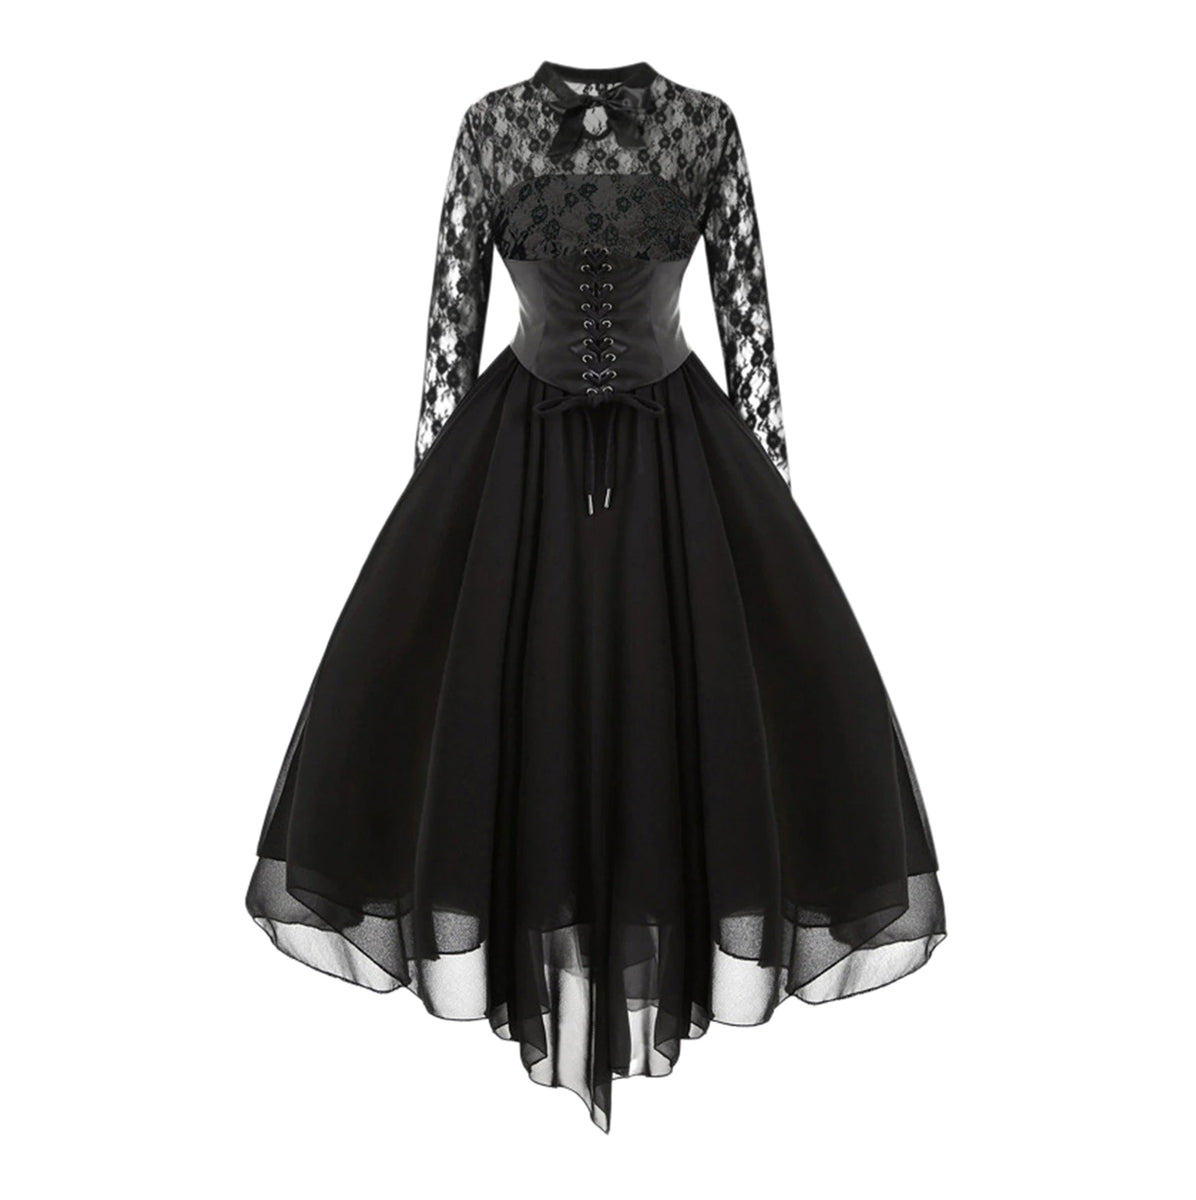 Long Sleeve Lace Gothic Dress – The Official Strange & Creepy Store!